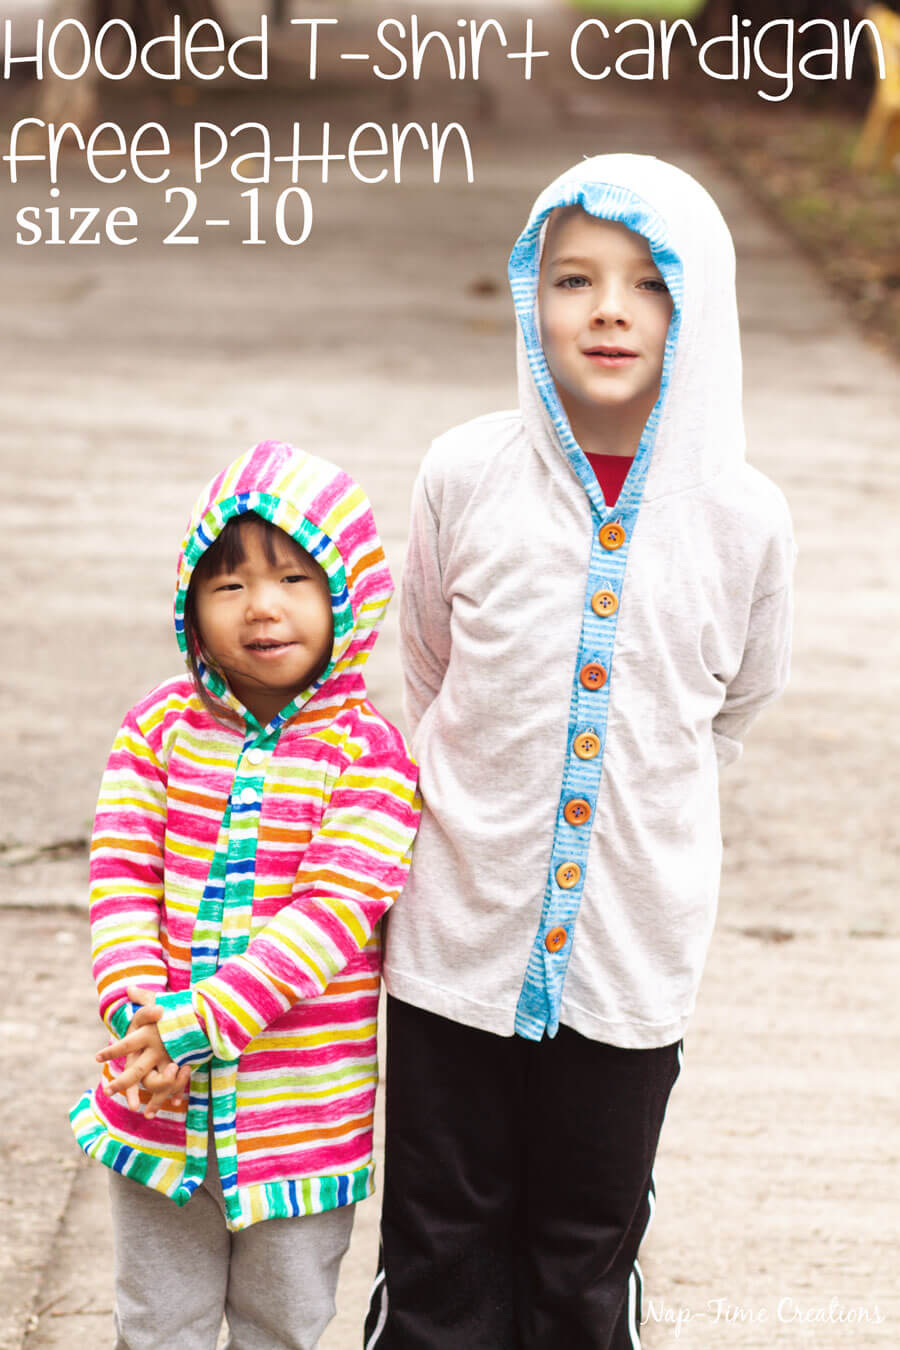 Hooded-T-Shirt-Free-sewing-Pattern-for-Kids-Boys-and-Girls-2-10-years-from-Nap-Time-Creations